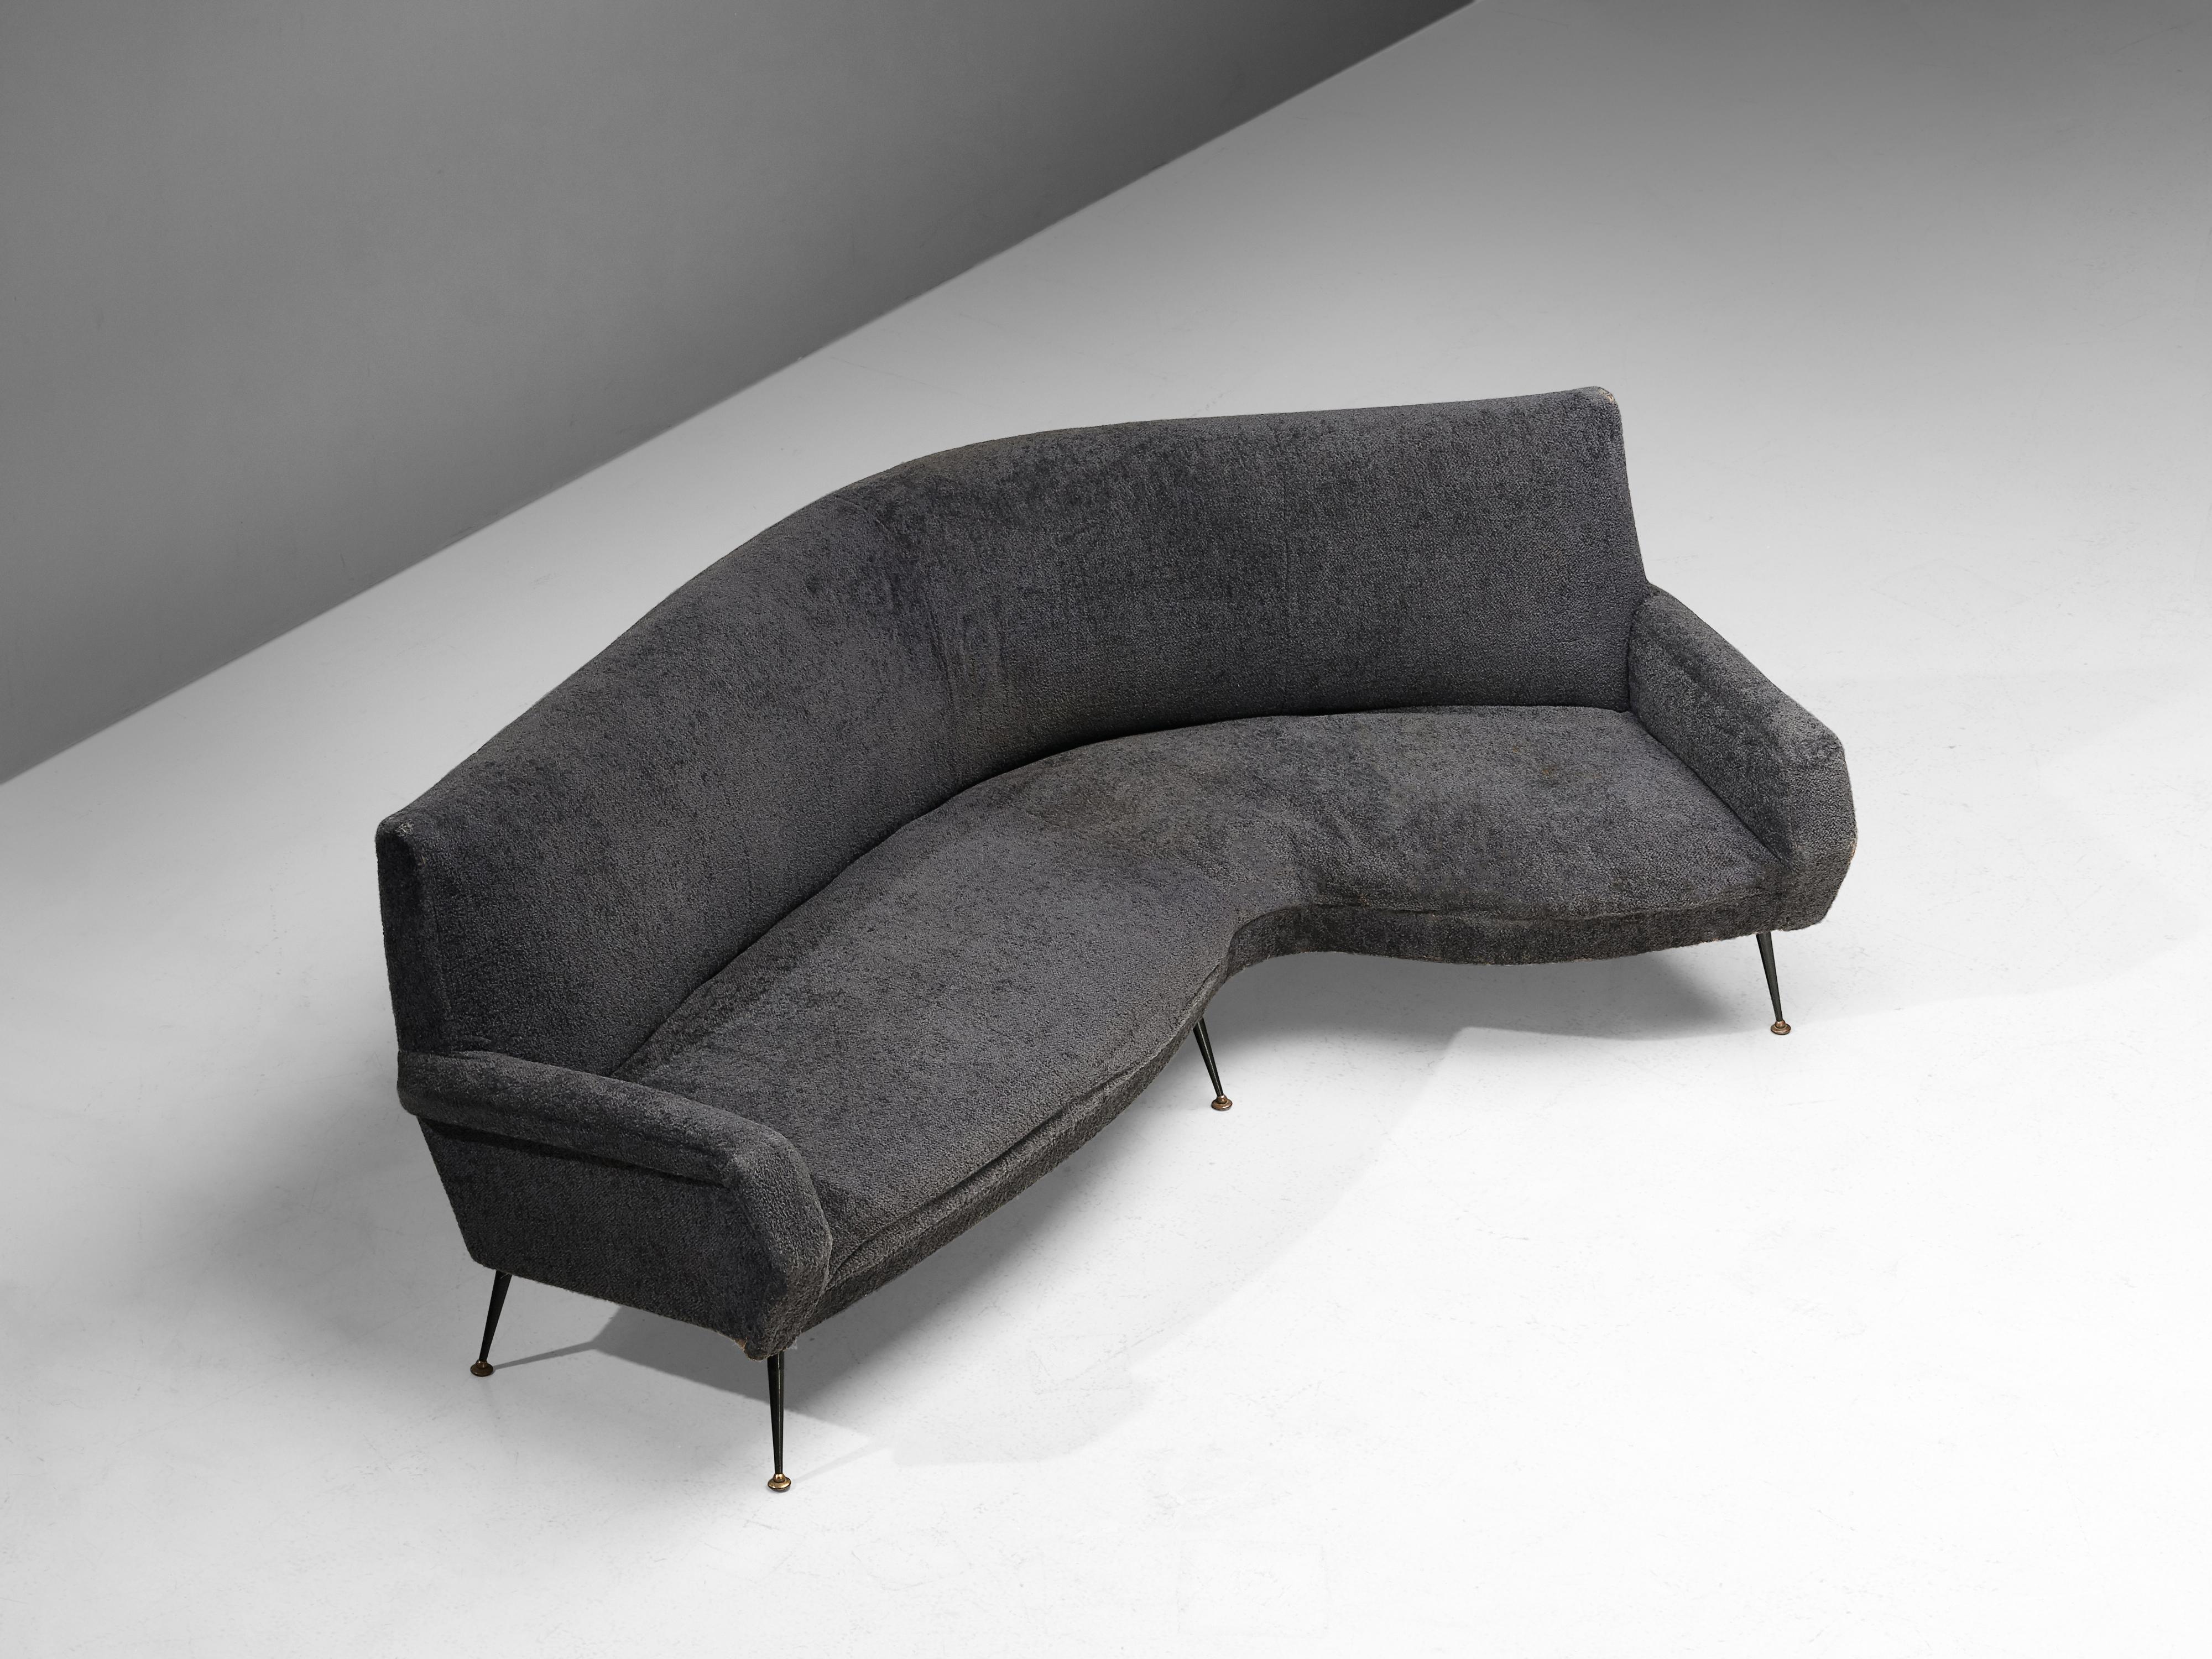 Gigi Radice for Minotti, curved sofa, upholstery and lacquered metal, Italy, 1960s. 

Gorgeous curved sofa designed by Gigi Radice and manufactured Minotti. This three-seat sofa has a playful shape due to the curve in the design, but maintains